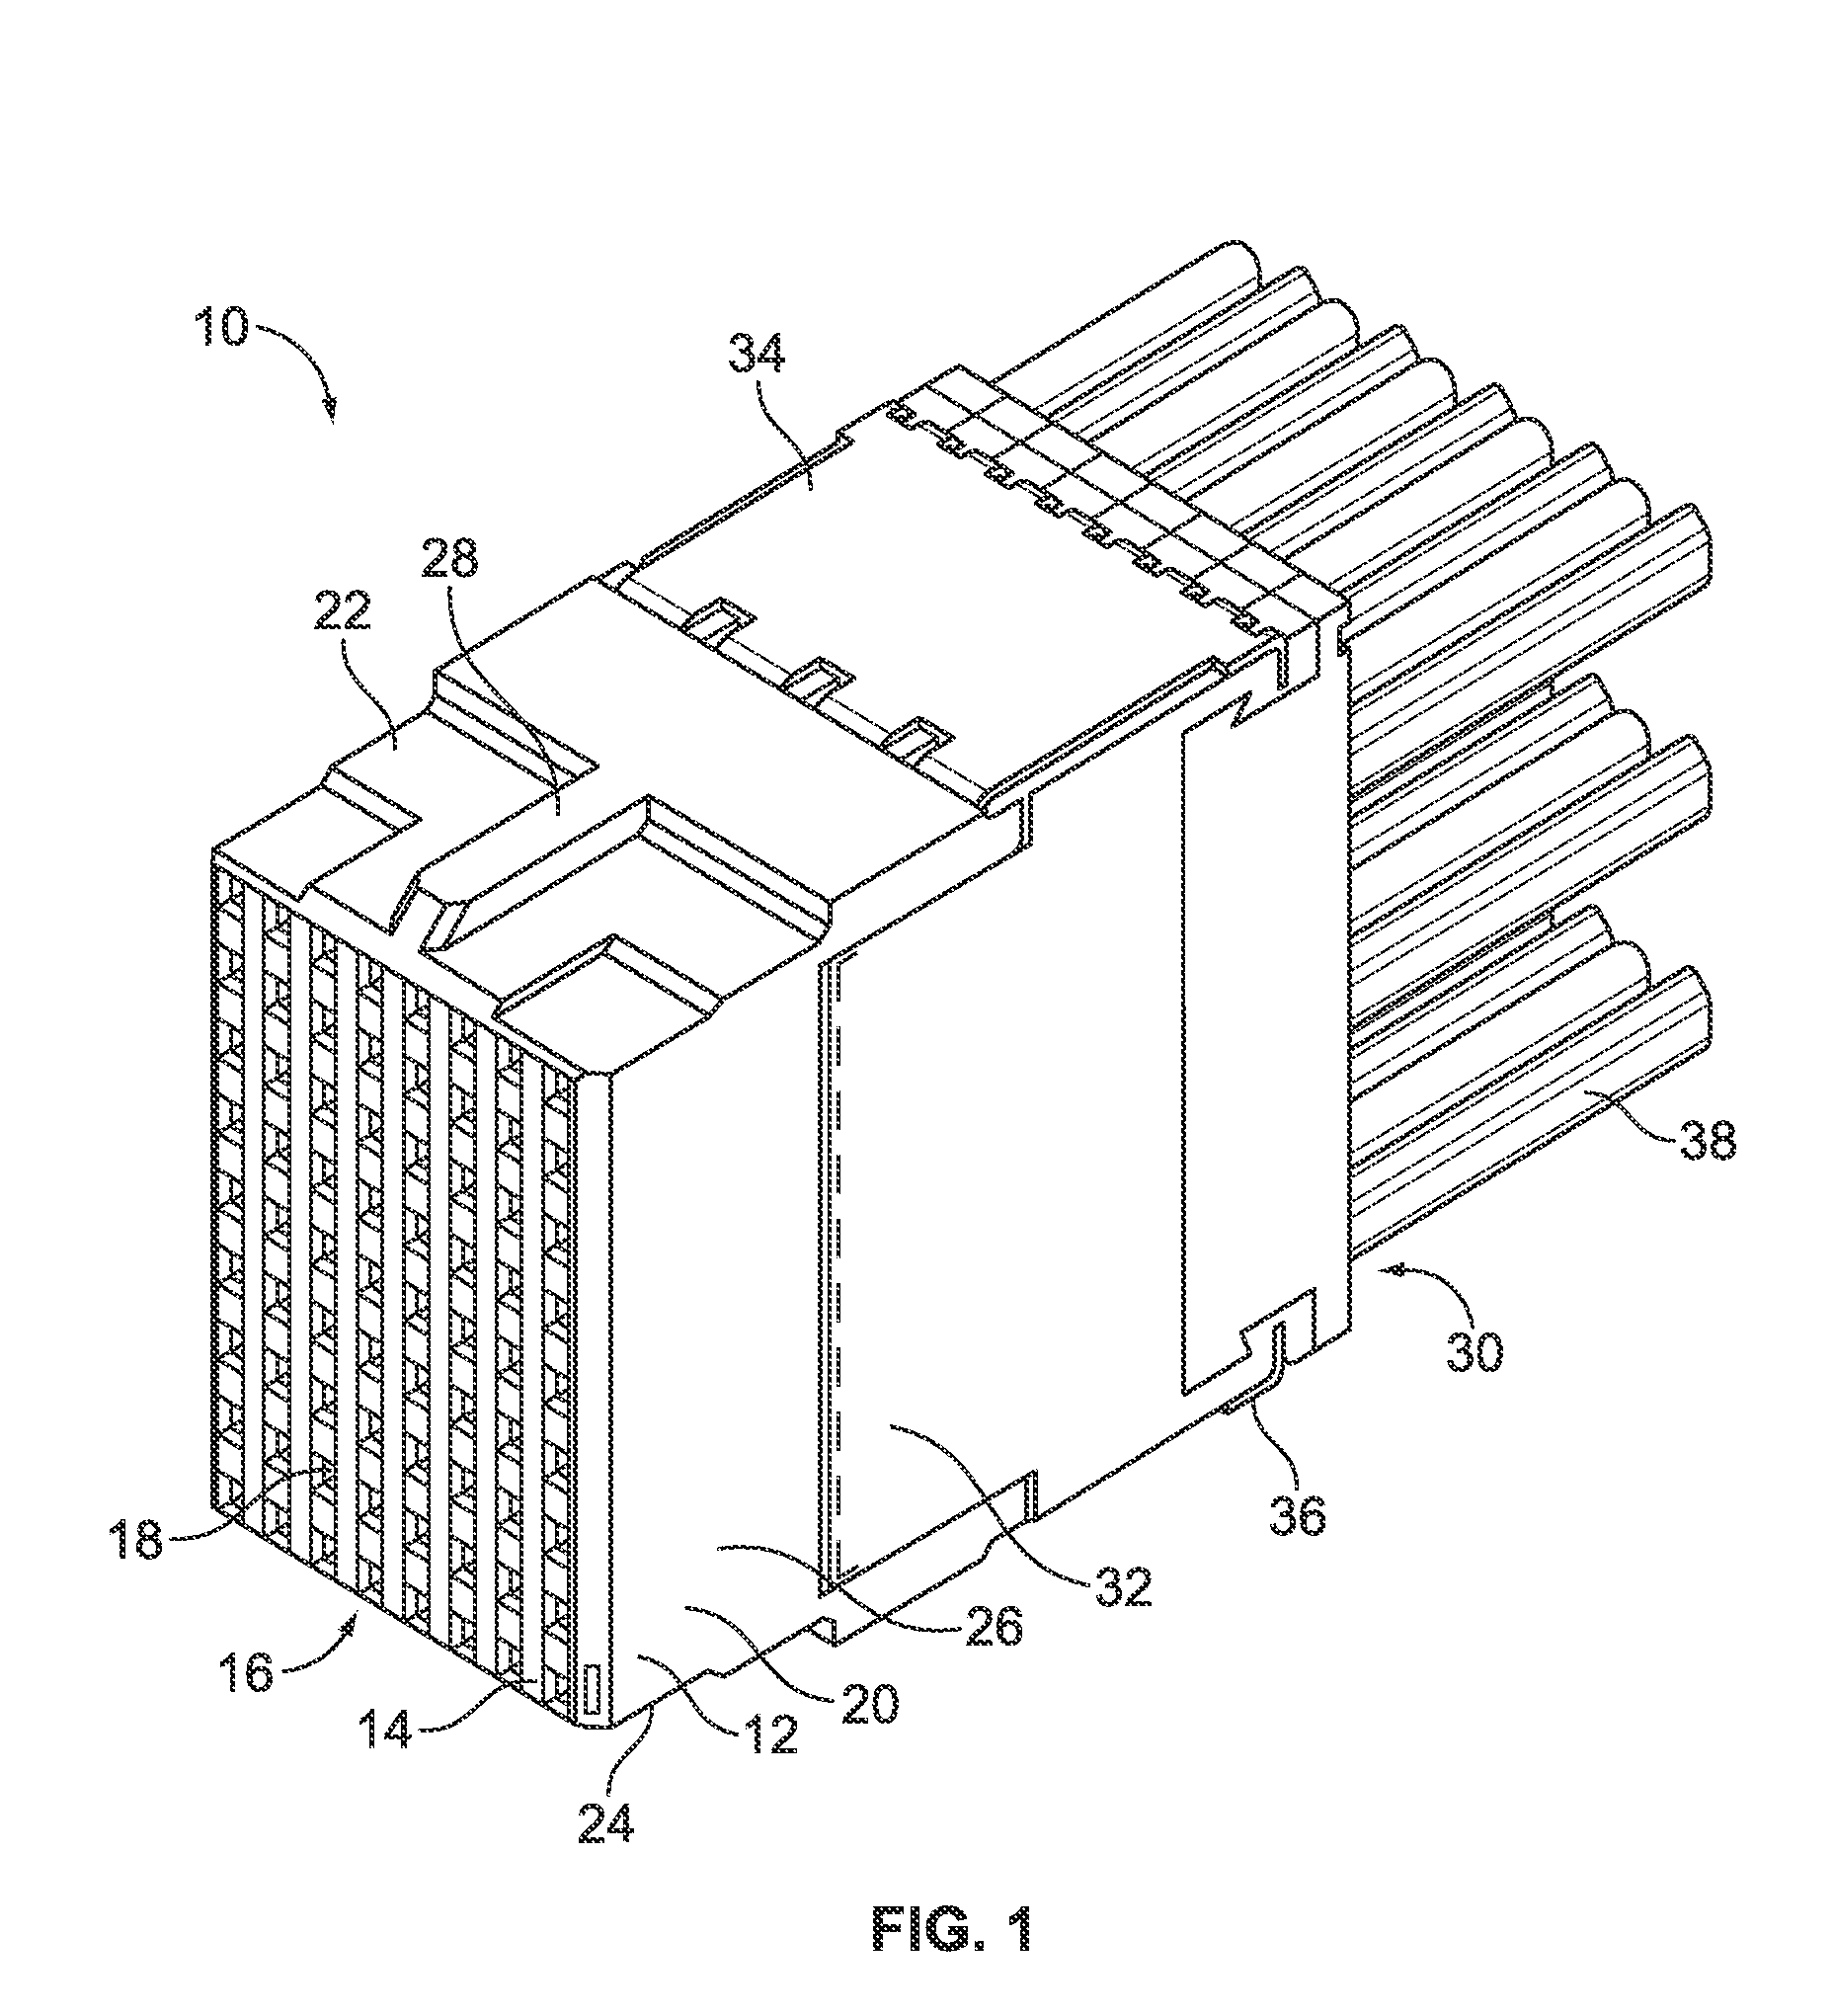 Connector assembly having a compensation circuit component